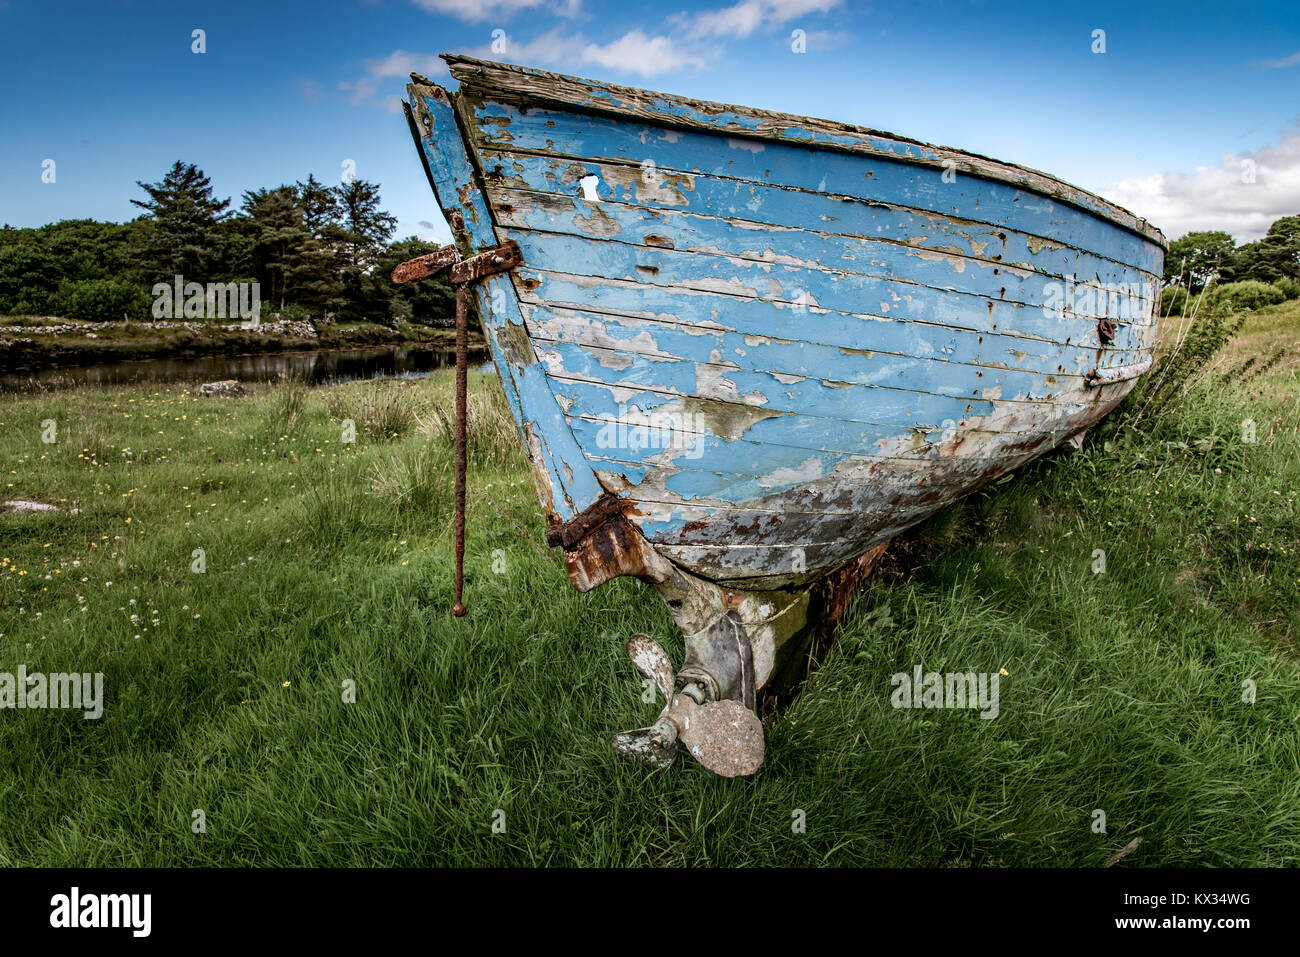 The wreck of a wooden boat is laid on the grass somewhere in Connemara, Ireland. Stock Photo